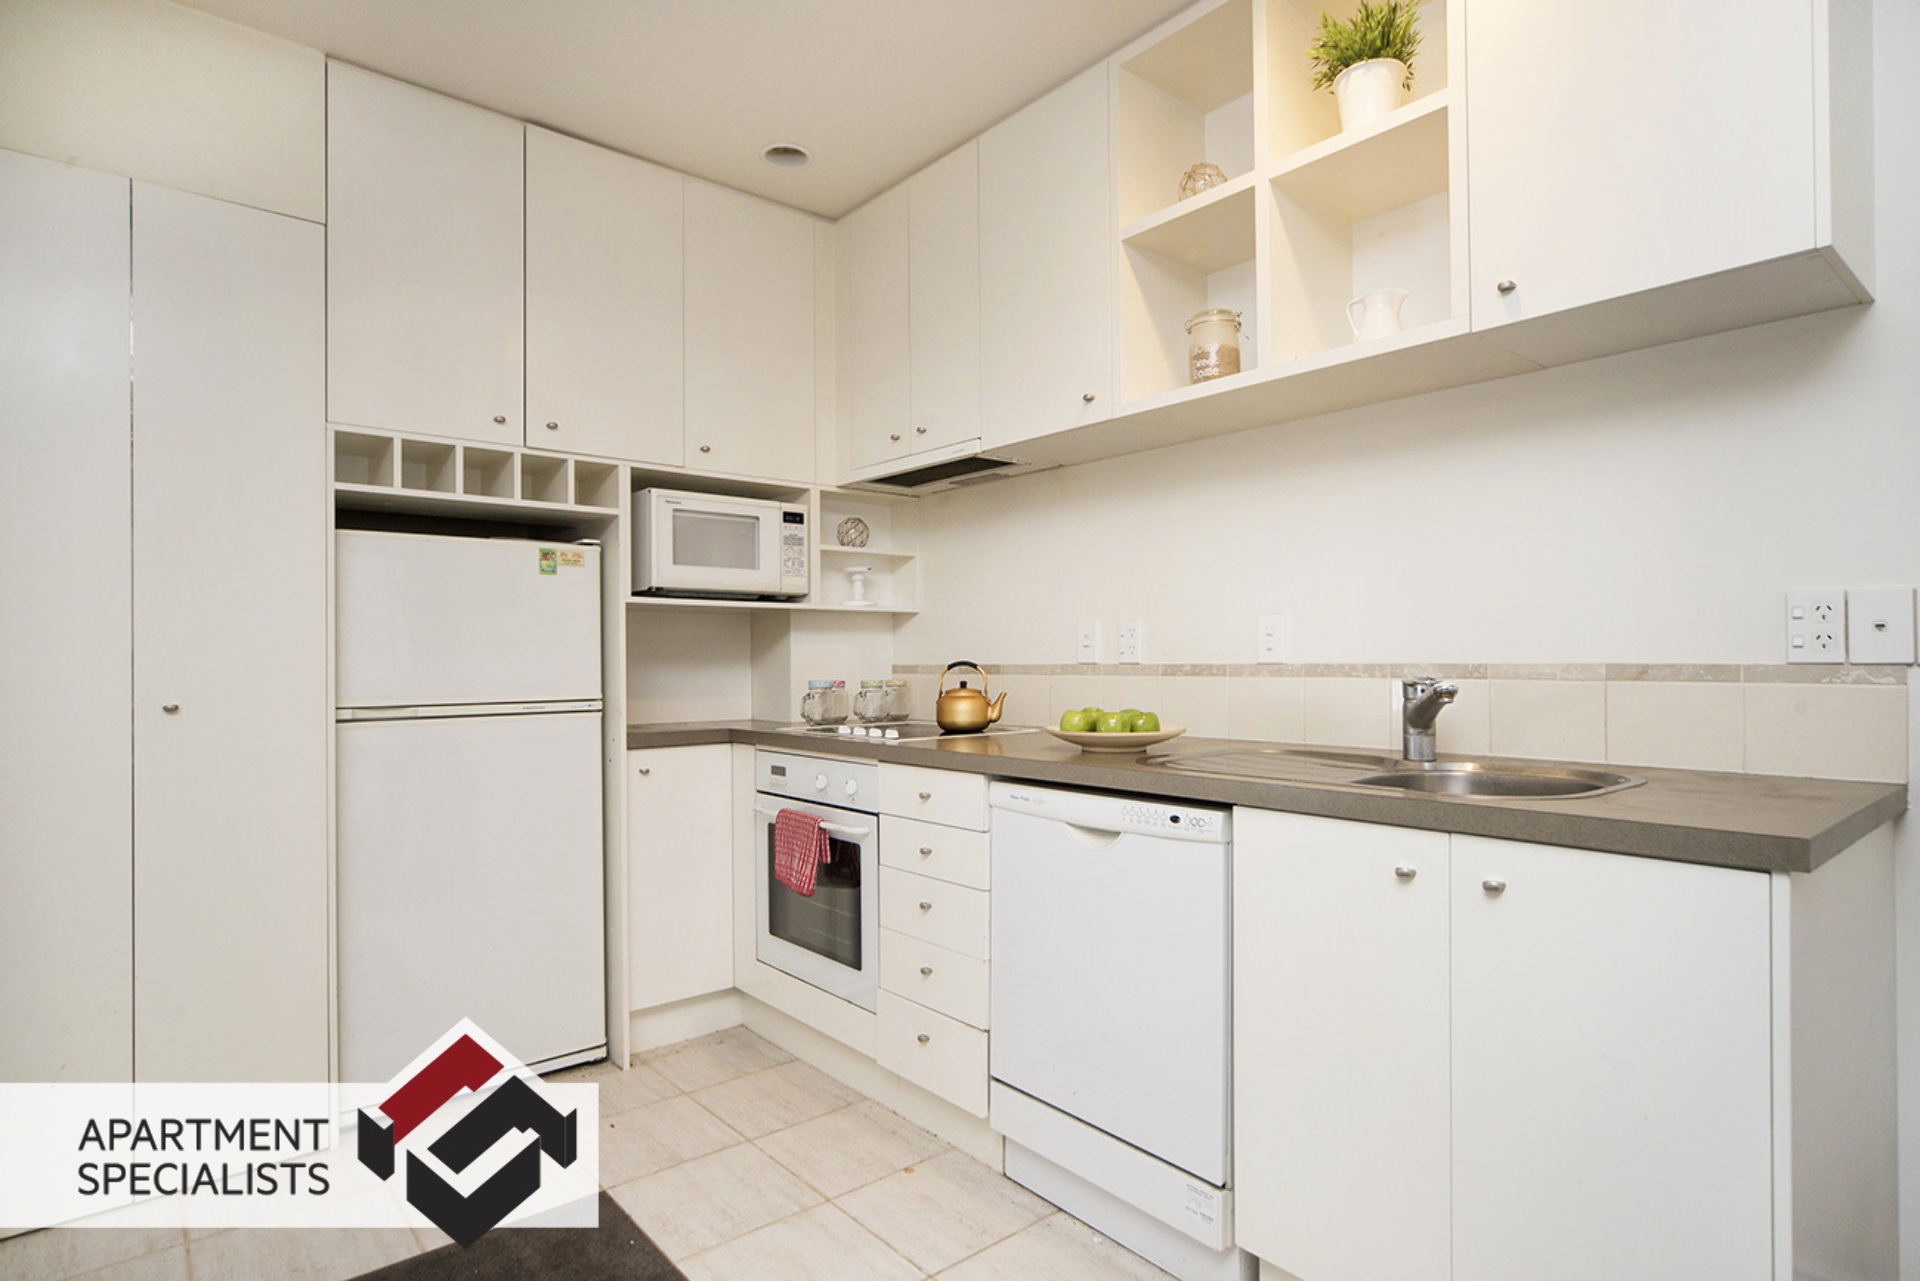 4 | 171 Queen Street, CENTRAL AUCKLAND | Apartment Specialists